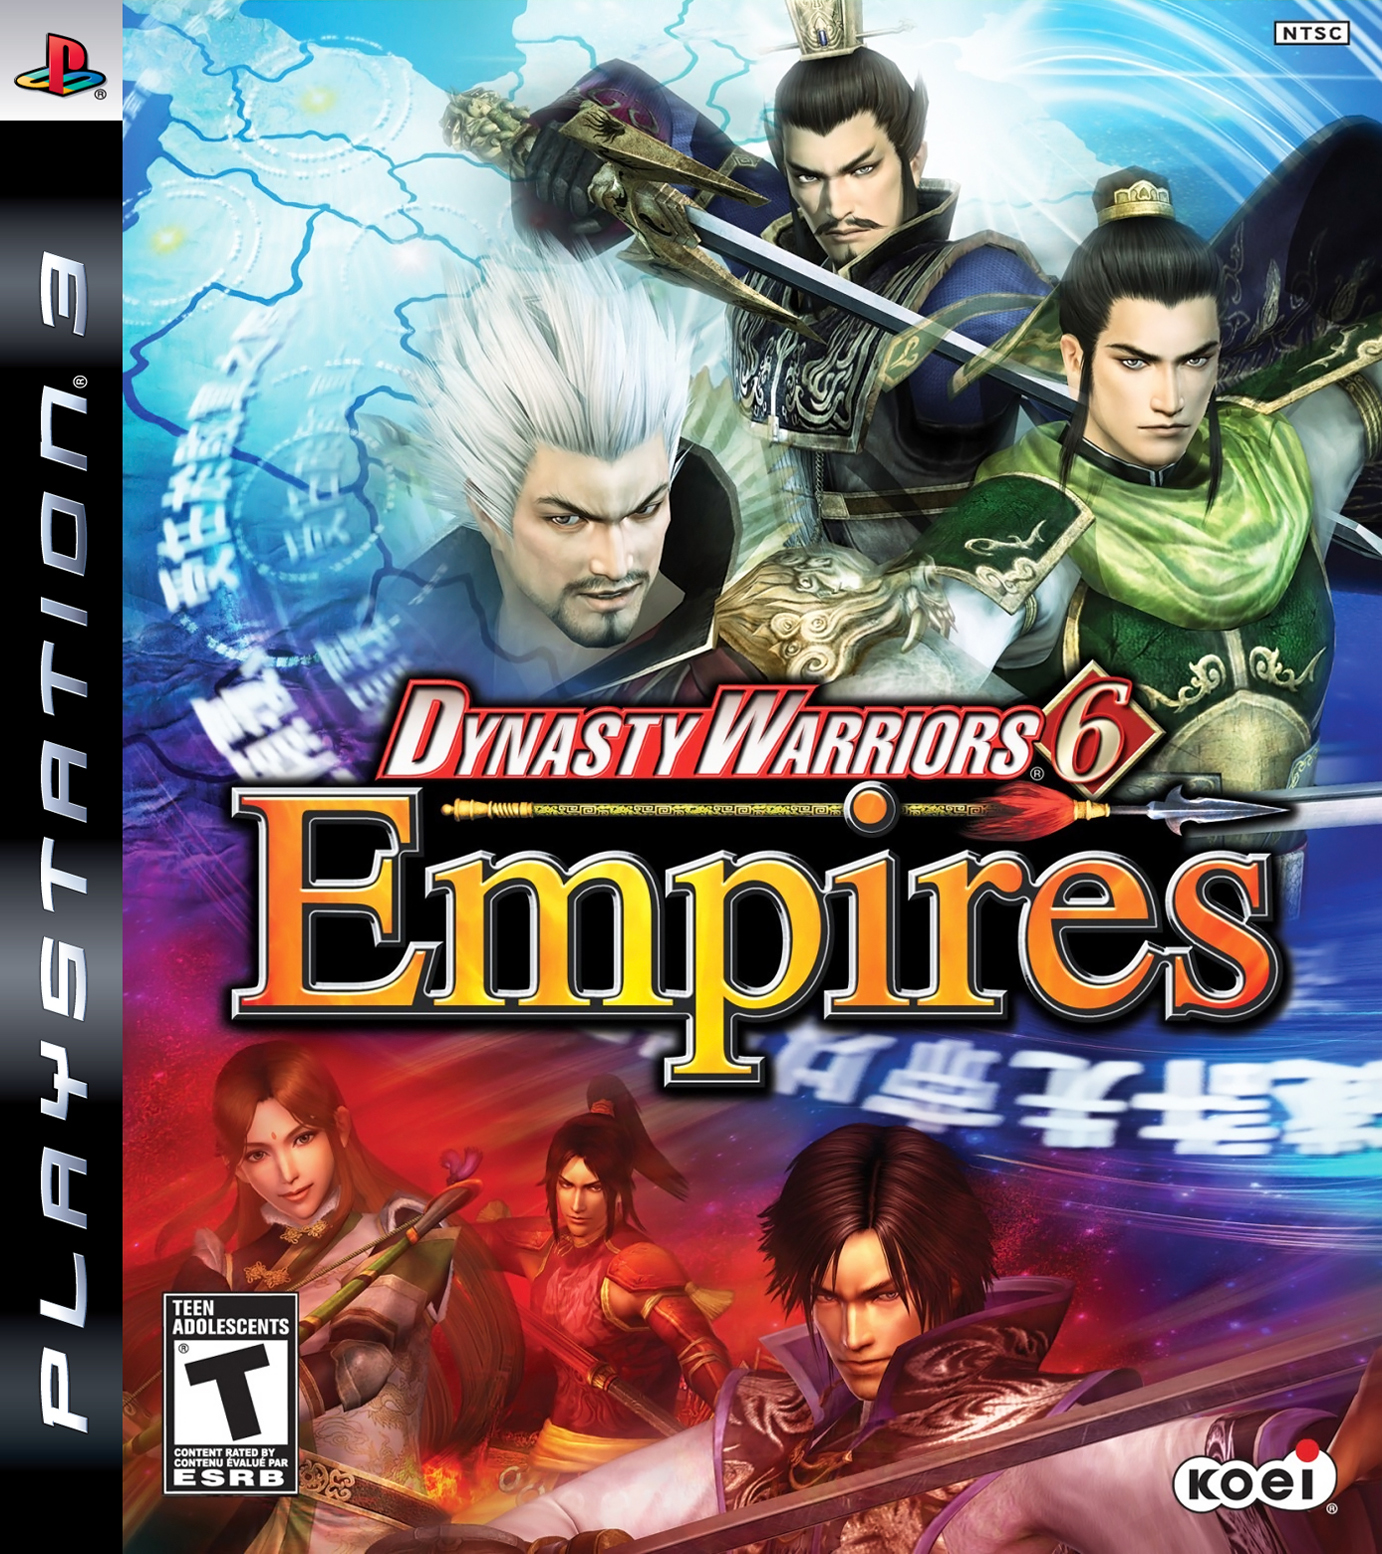 Dynasty Warrior 6 Empires Psp Iso Fasrch